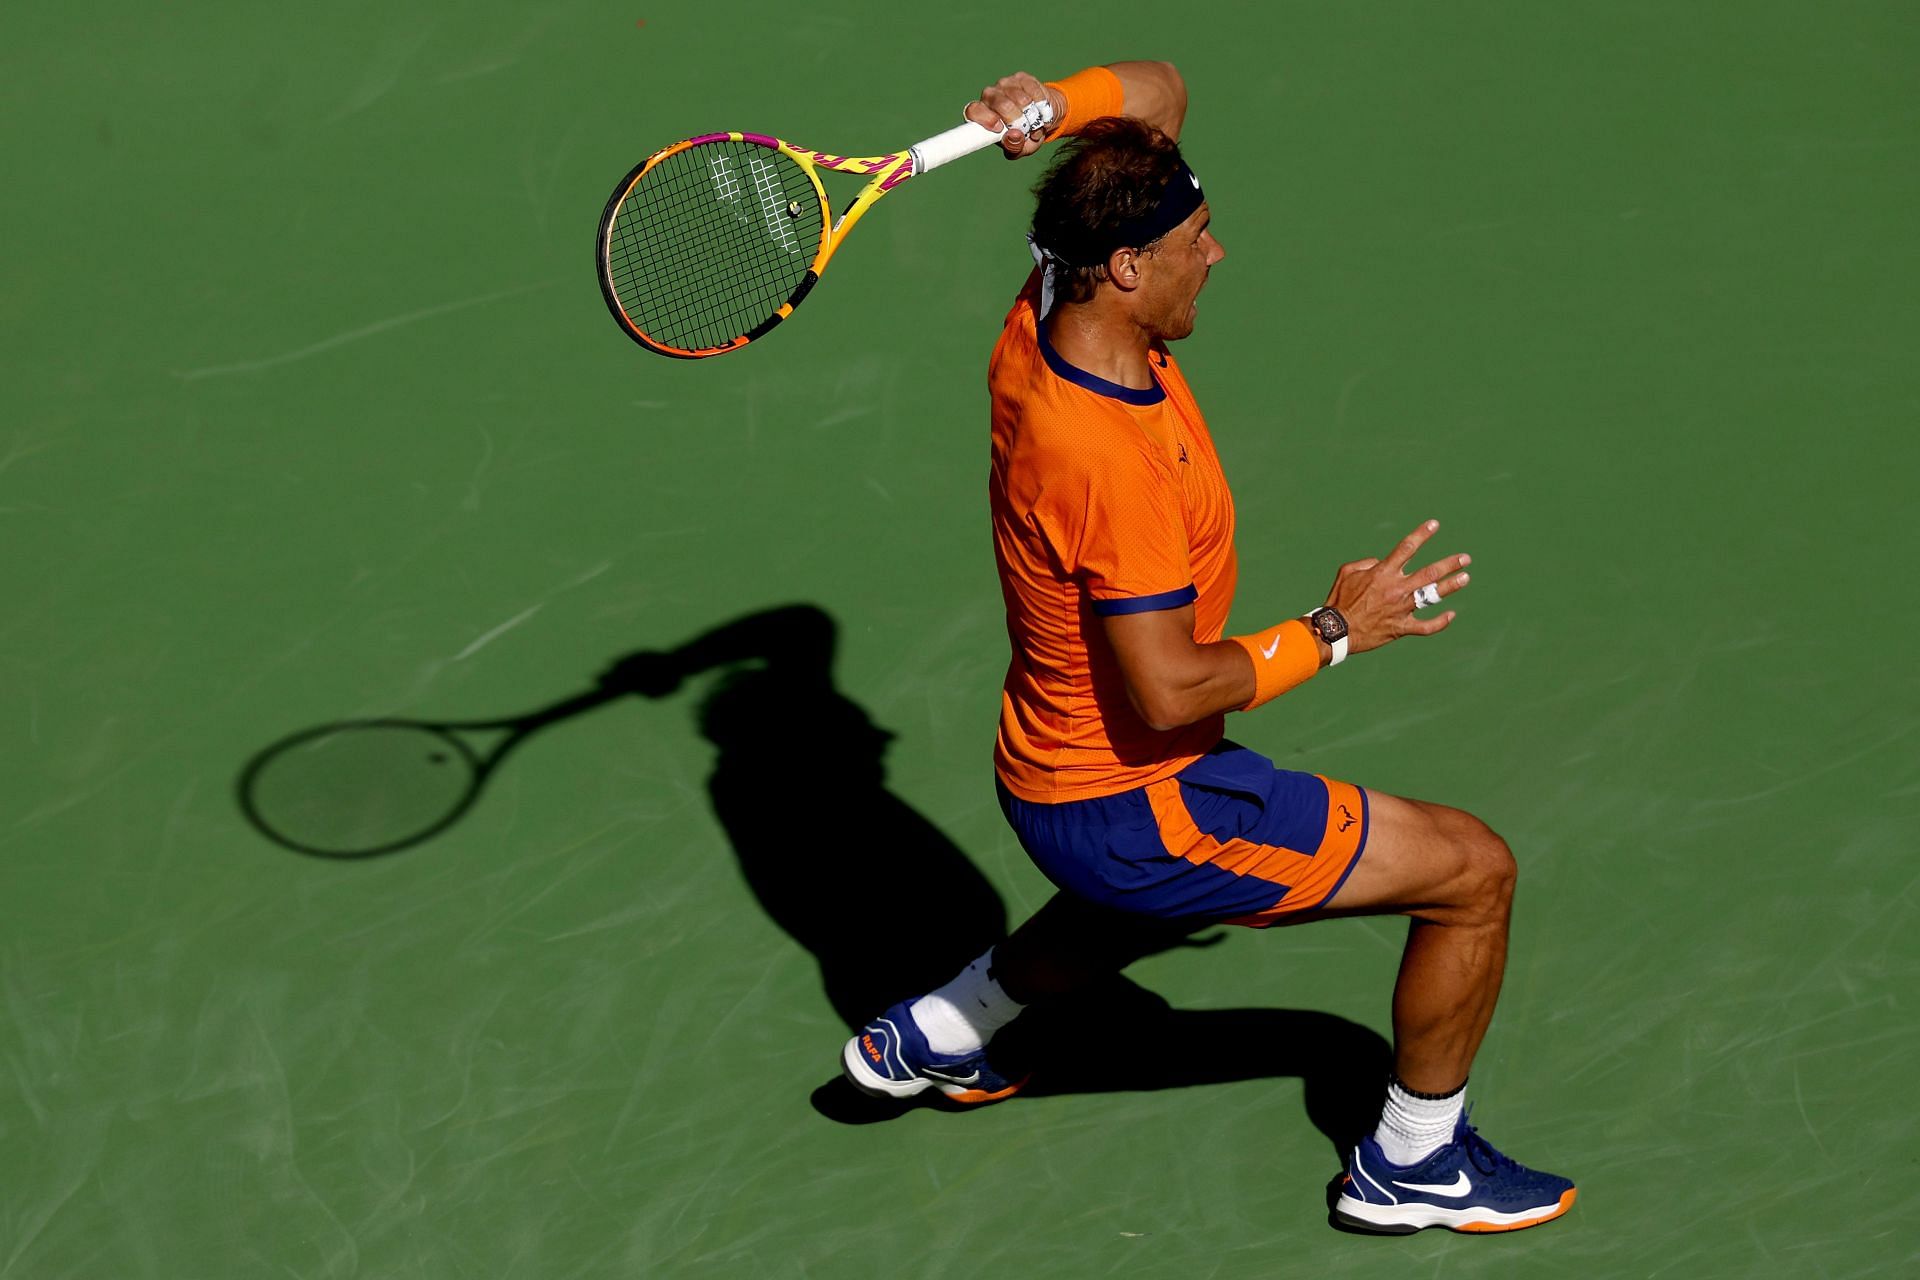 Rafael Nadal last featured at the Indian Wells Masters